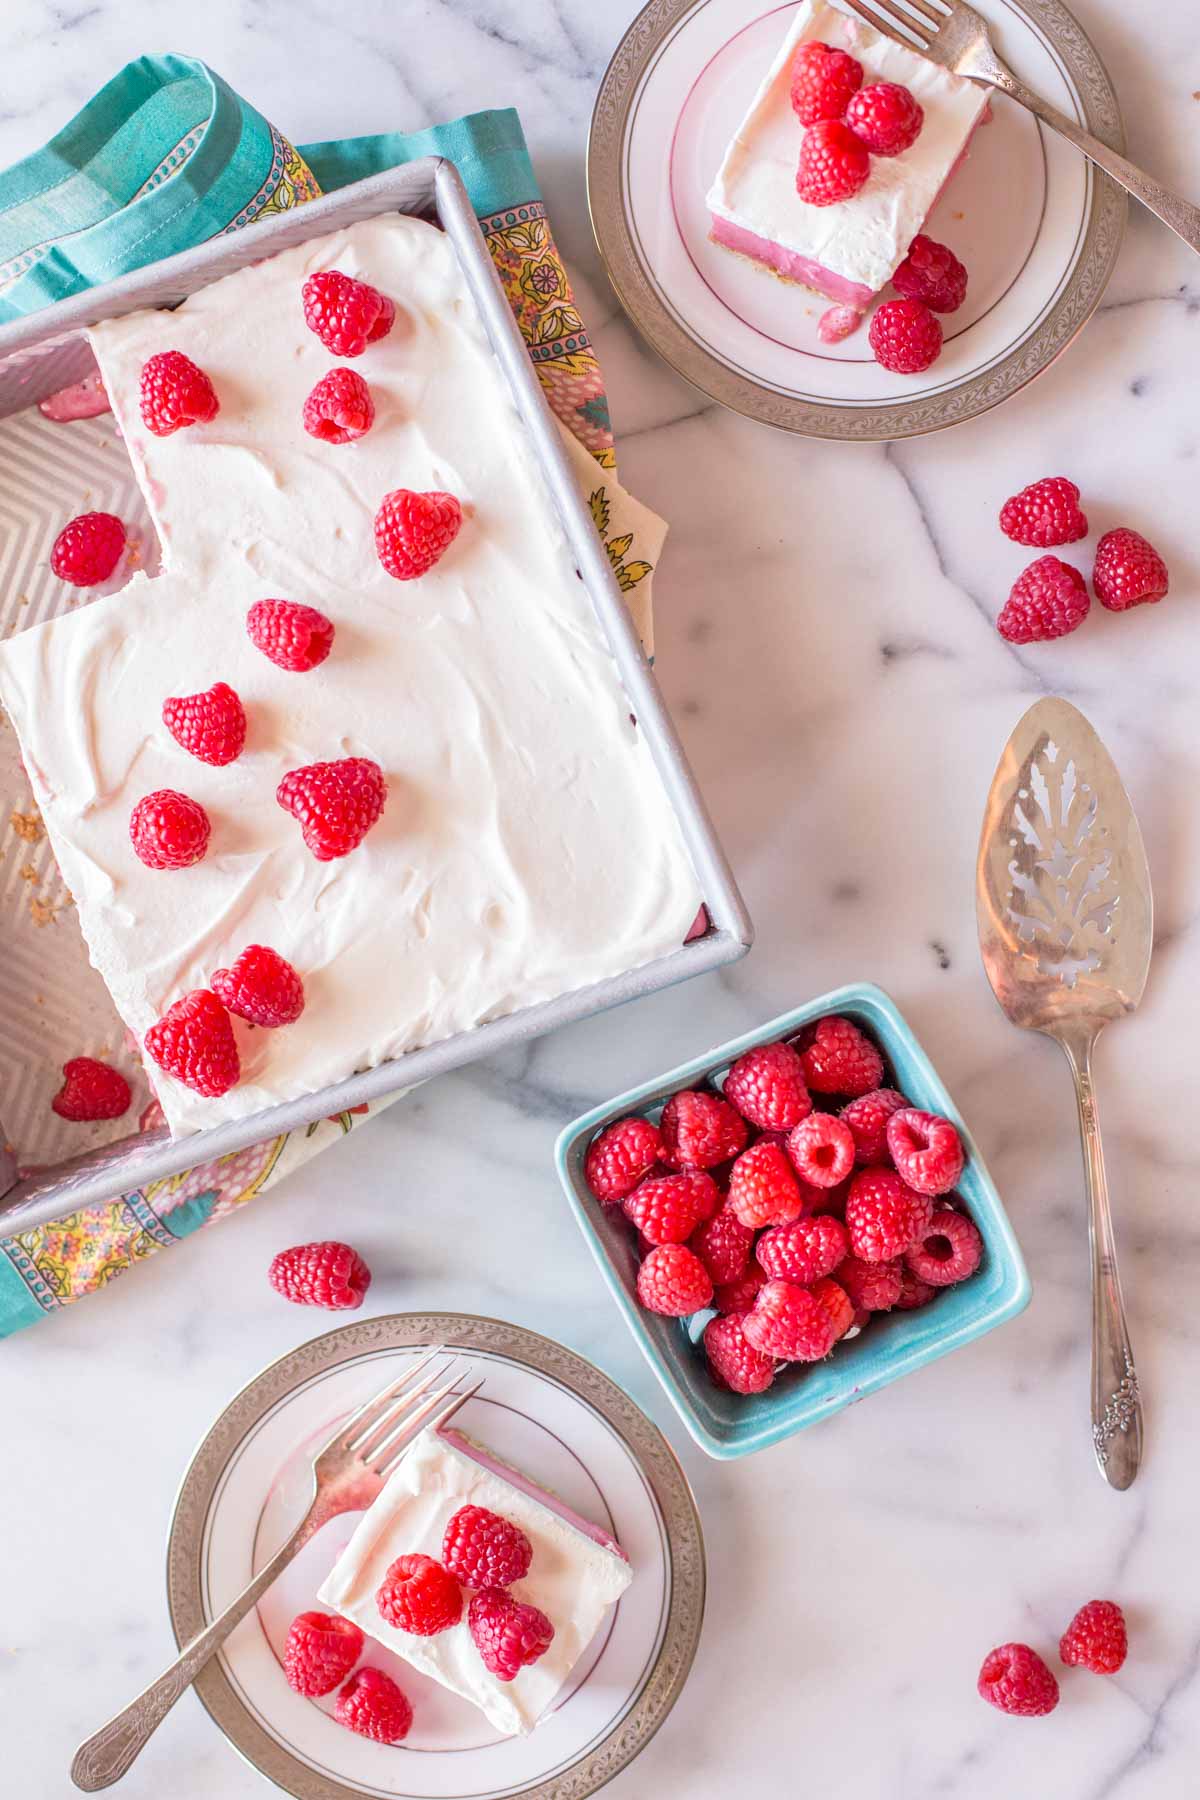 Cool and Creamy Raspberry Pretzel Dessert in a baking pan, sitting next to a carton of fresh raspberries and two plates with pieces of the dessert on each of them. 